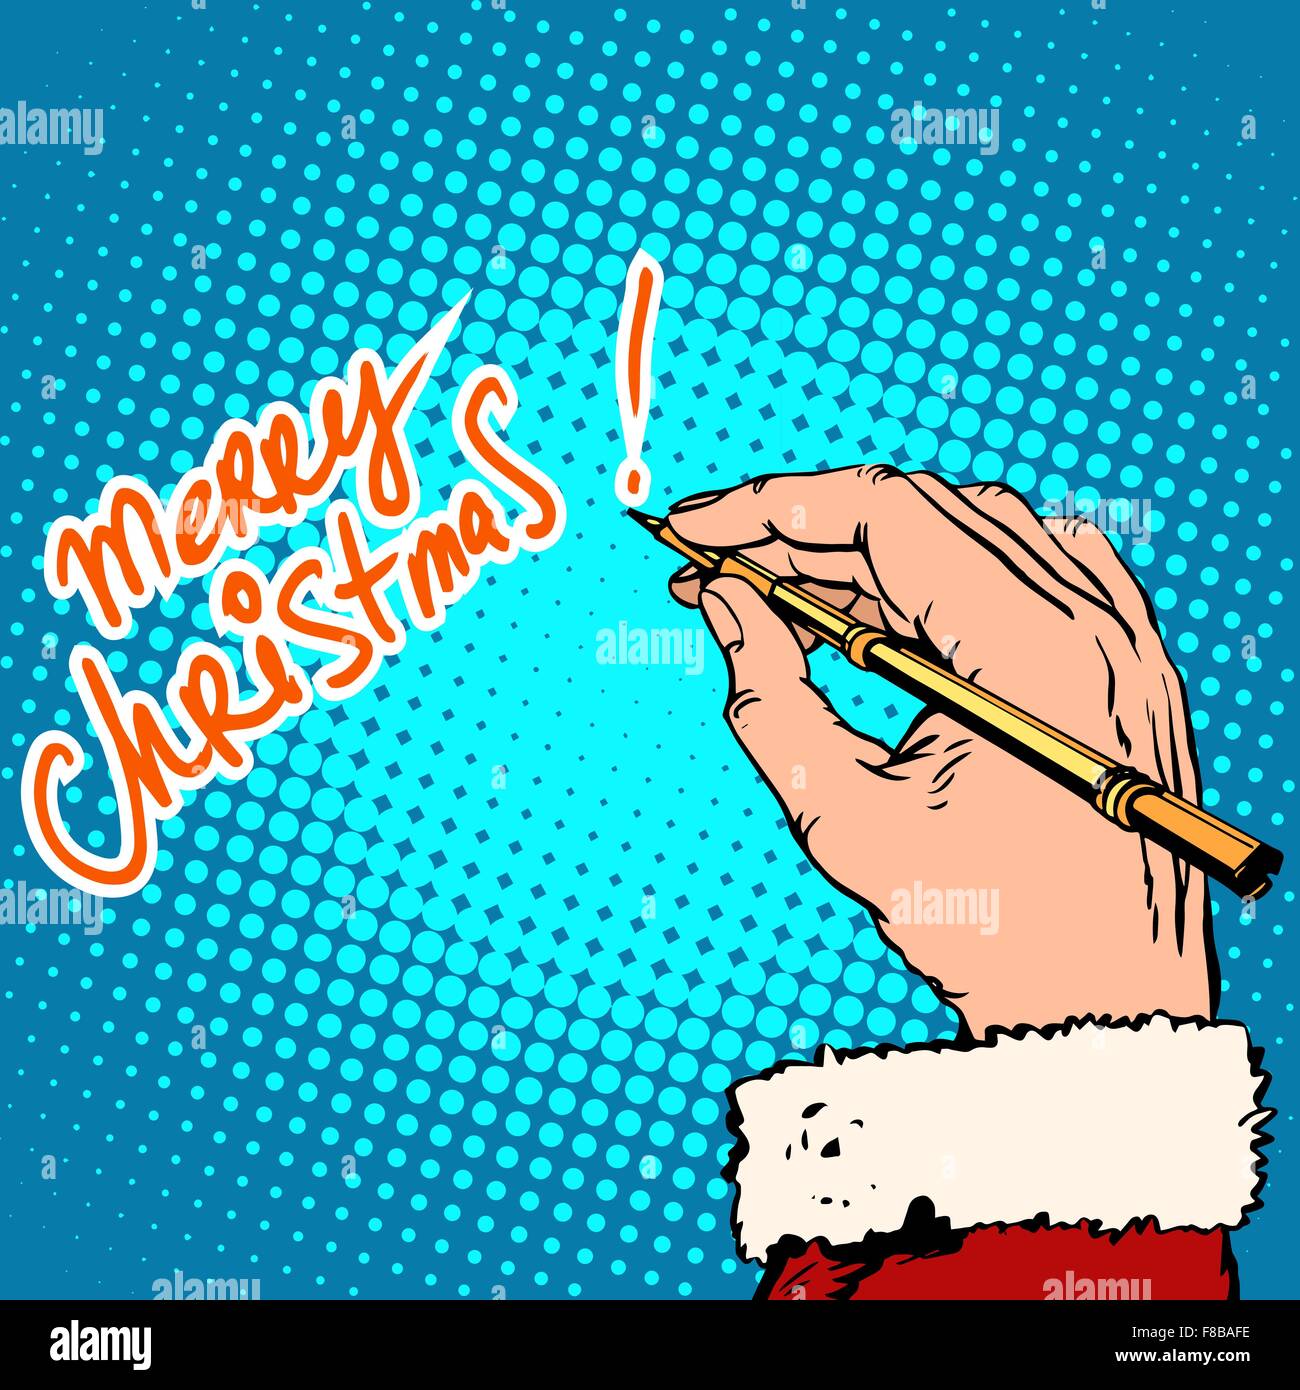 Merry Christmas Santa Claus signed Stock Vector